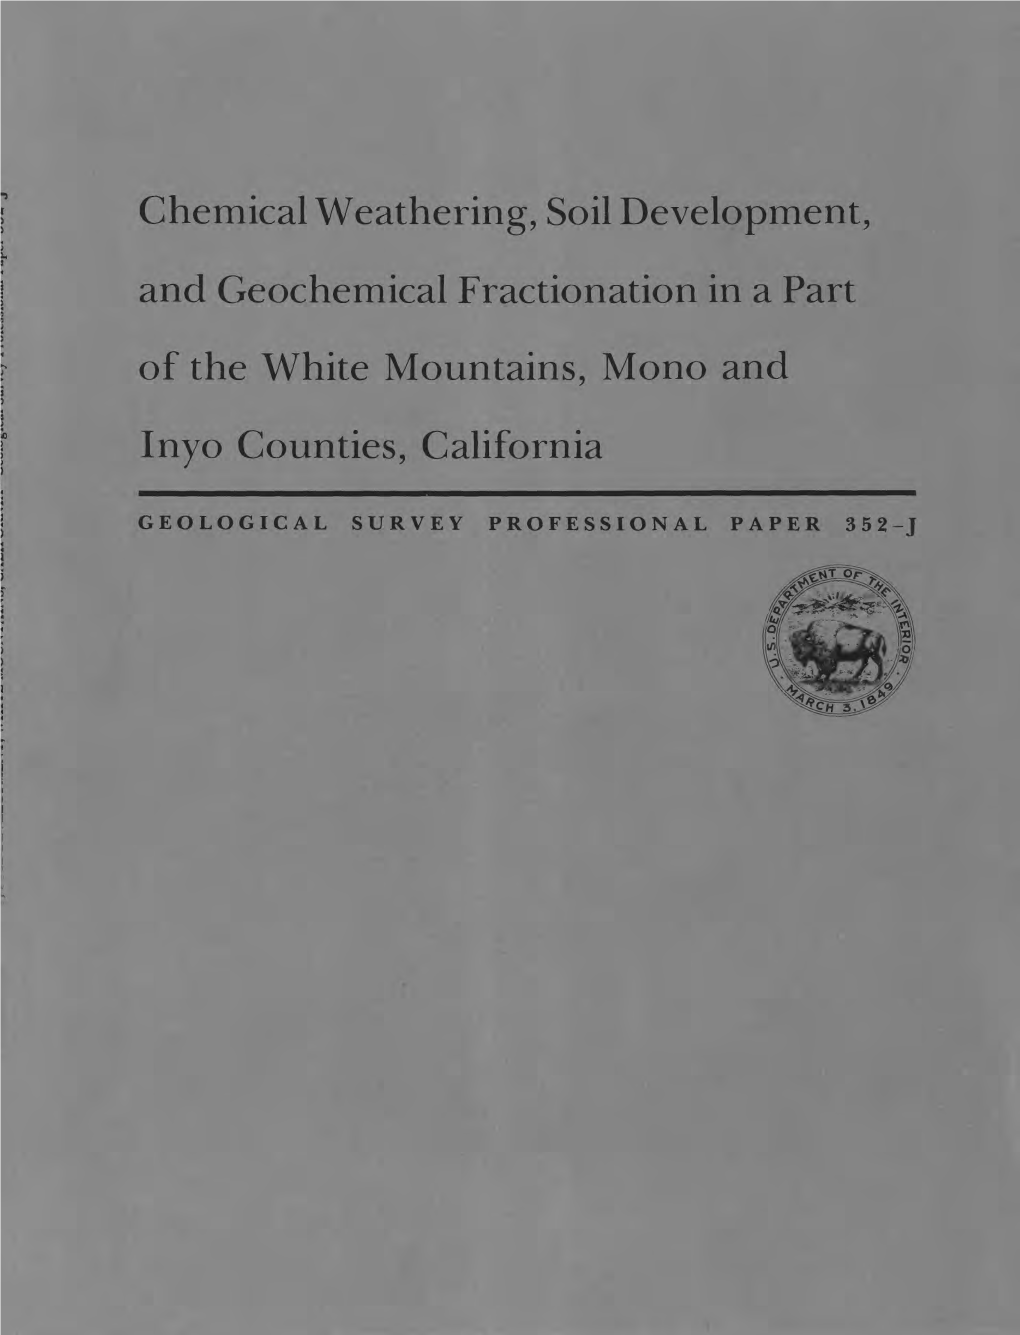 Chemical Weathering, Soil Development, and Geochemical Fractionation in a Part of the White Mountains, Mono and Inyo Counties, California